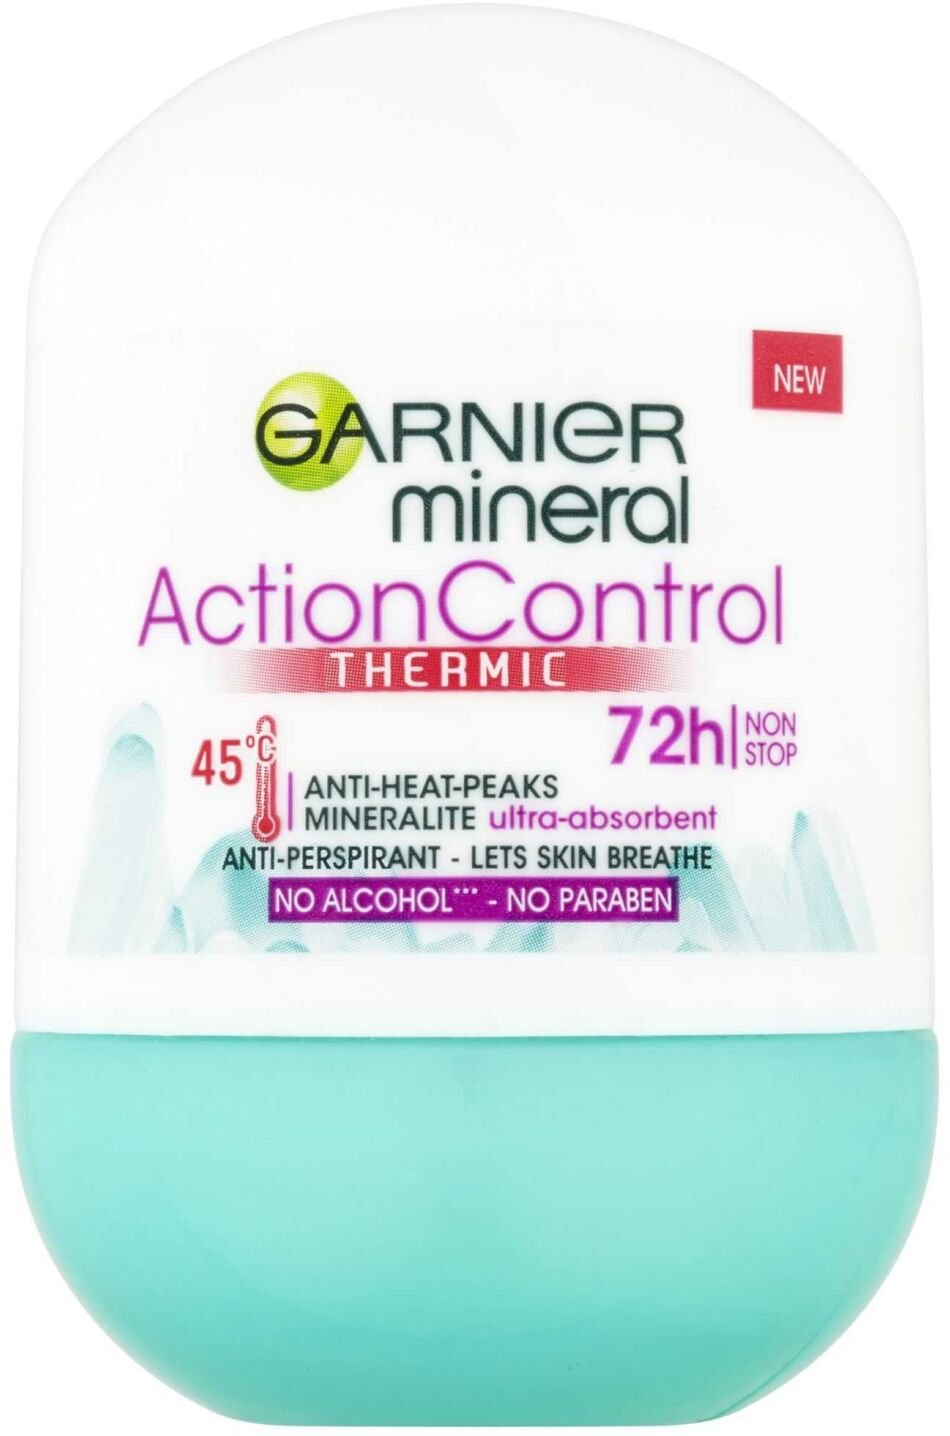 Garnier Mineral Action Control Thermic 72h deodorant